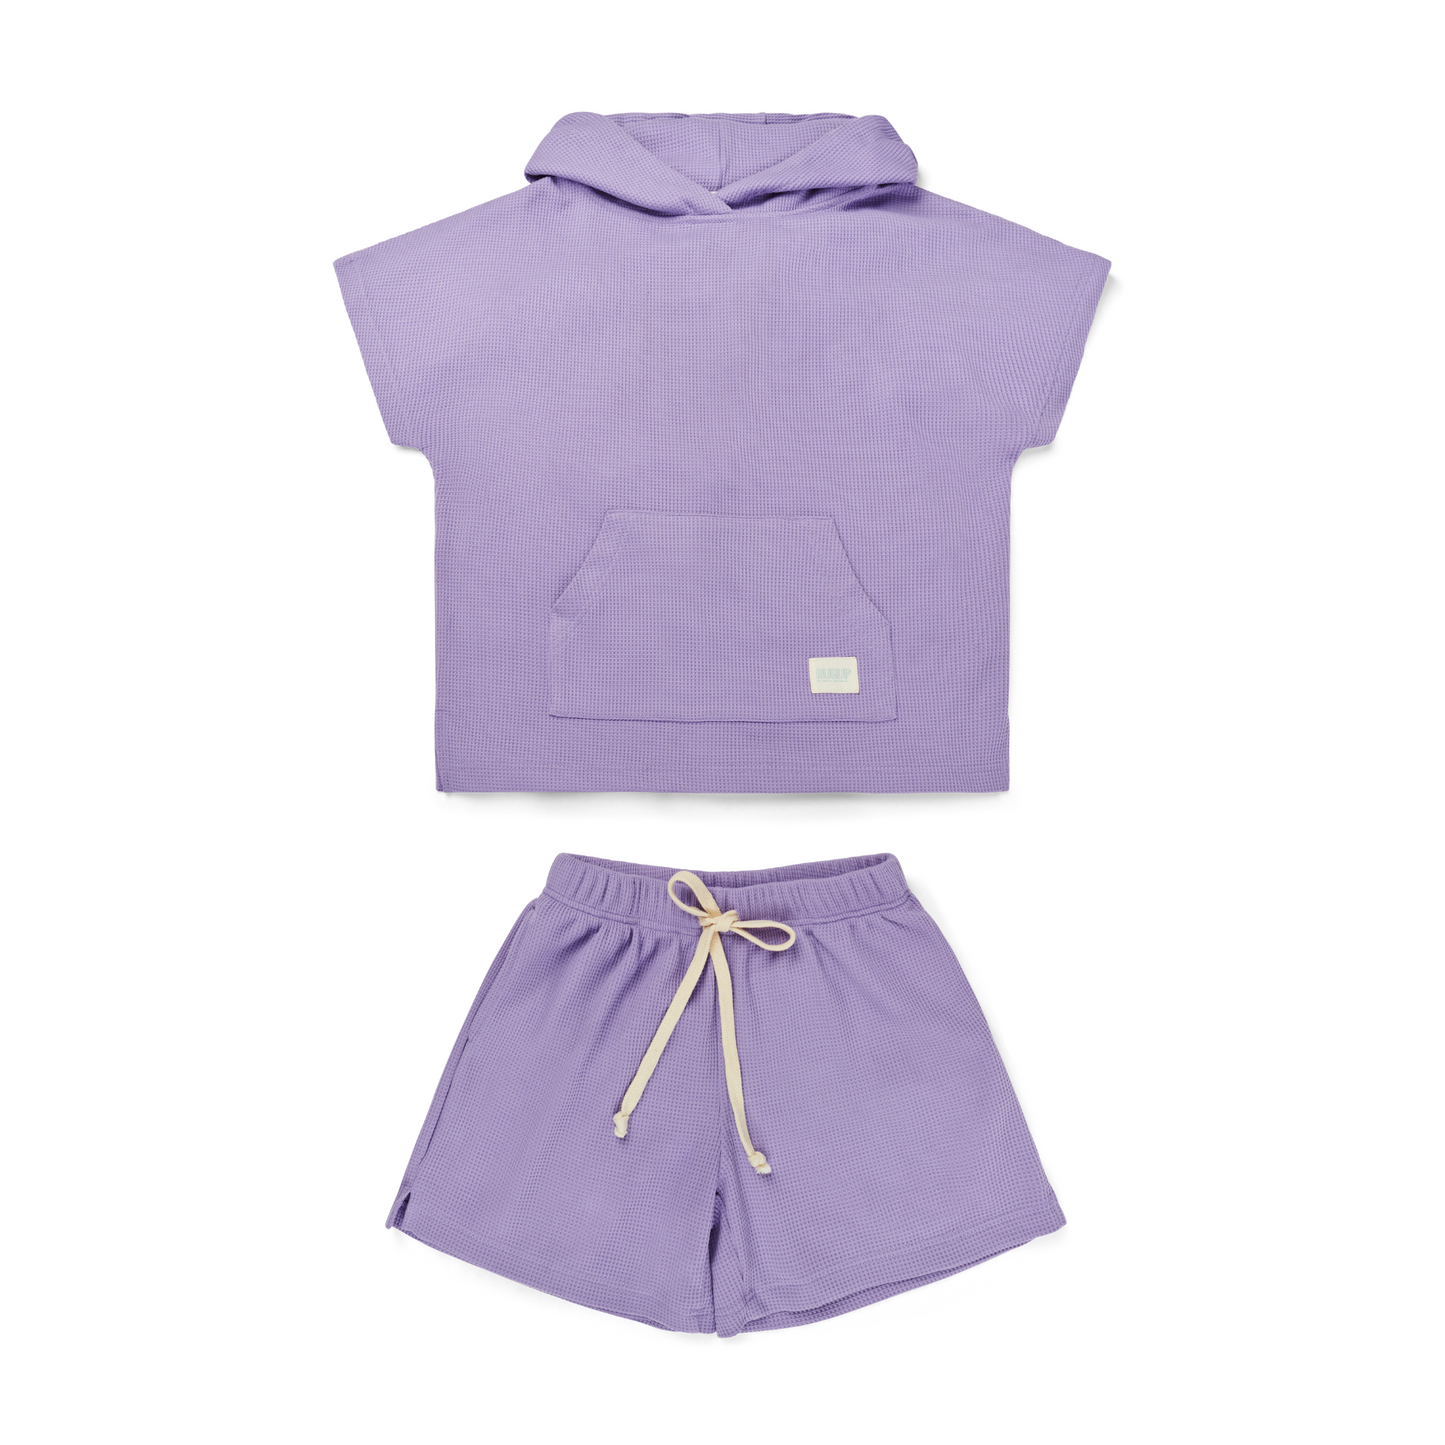 Lavender Purple Waffle Hooded Towel top and shorts